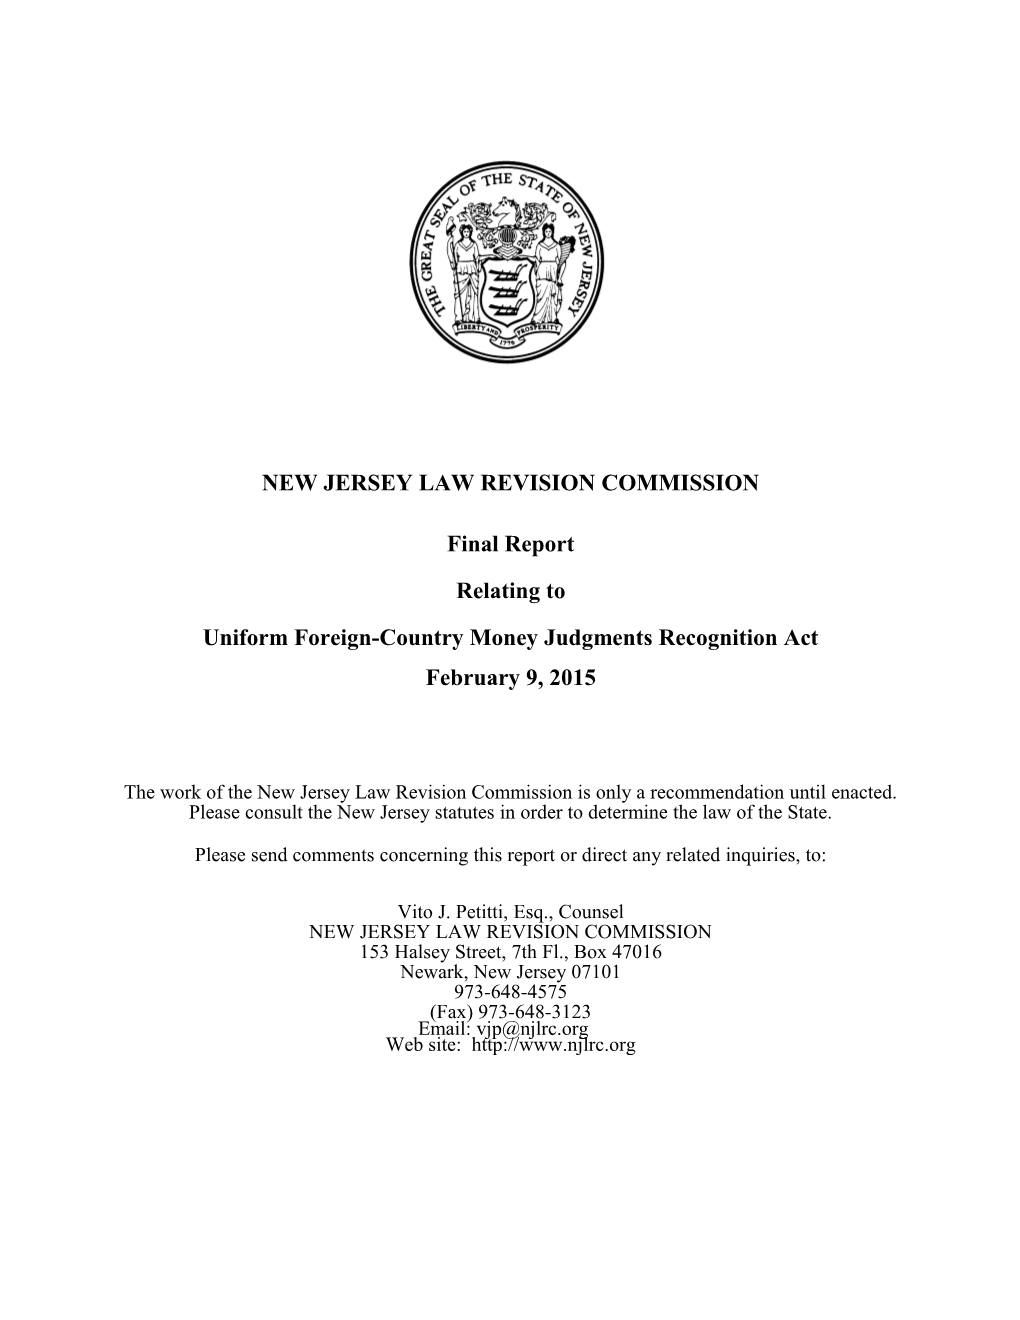 Uniform Foreign-Country Money Judgments Recognition Act